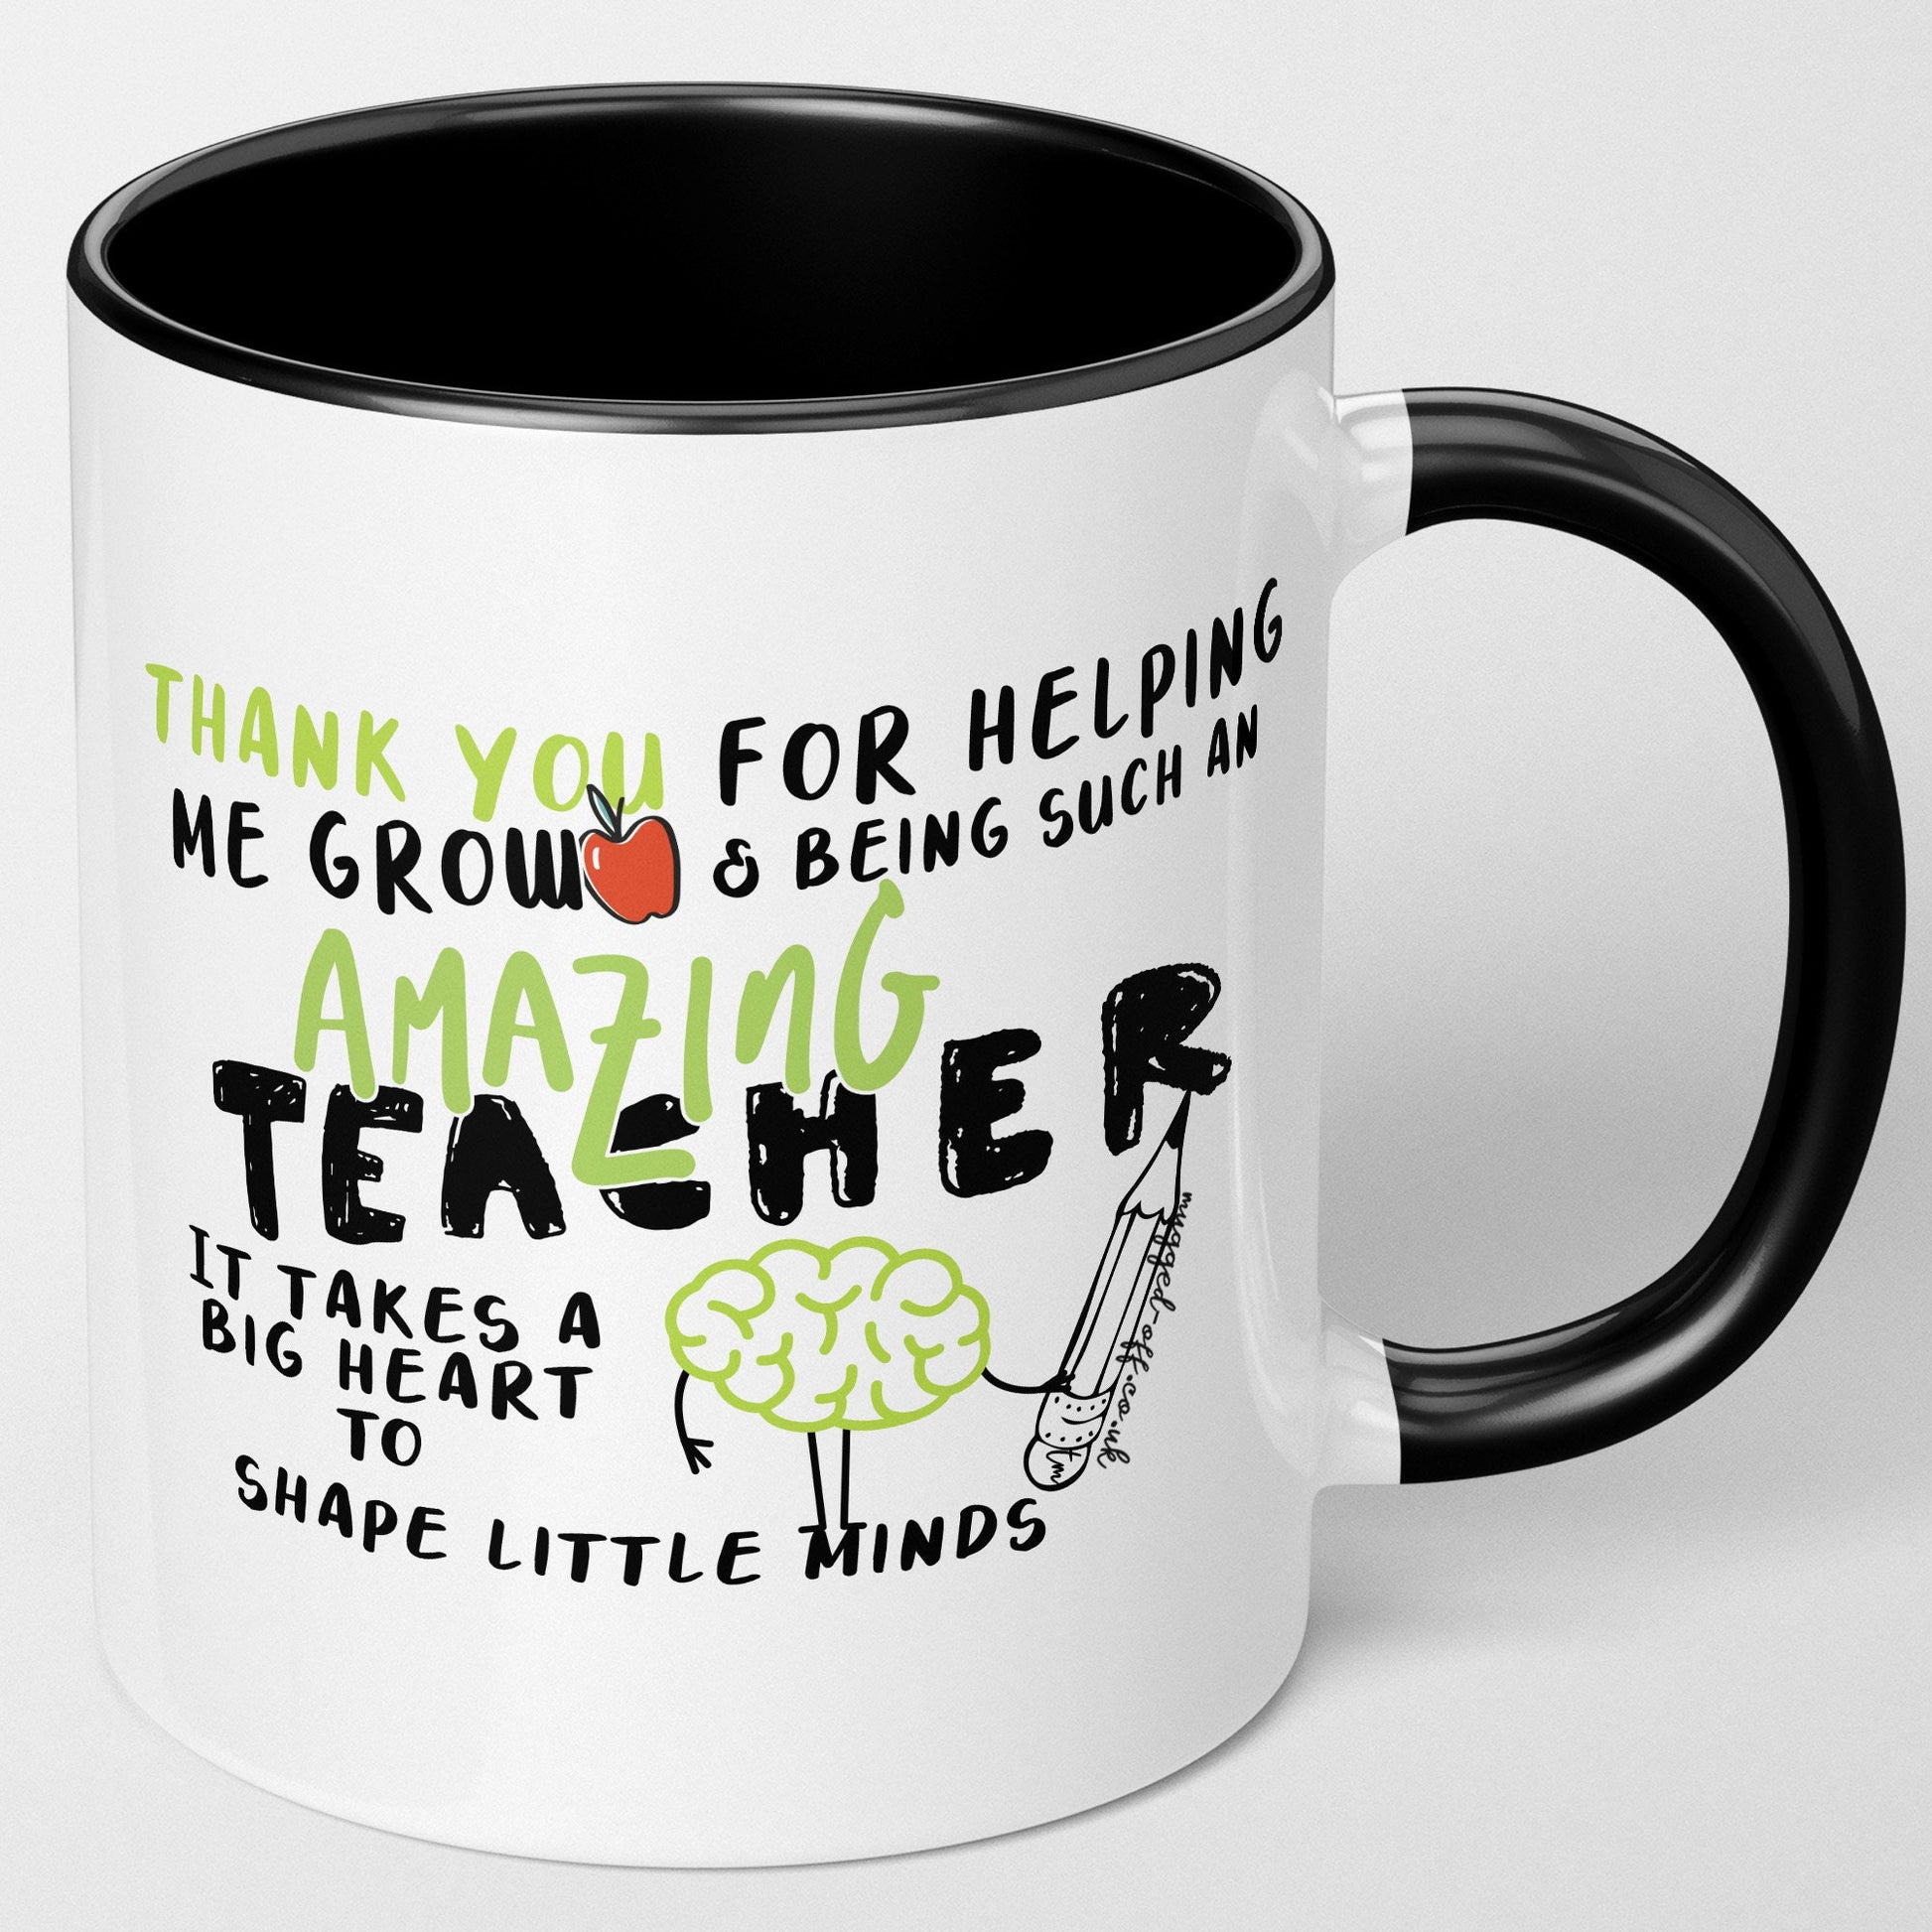 Amazon.com : Huxters Teacher Appreciation Card - Square Thank You Card for  Teachers - Inspirational Quote and Artwork - Ideal for Retirement - Thank  you Teacher Gift - End of School Teacher